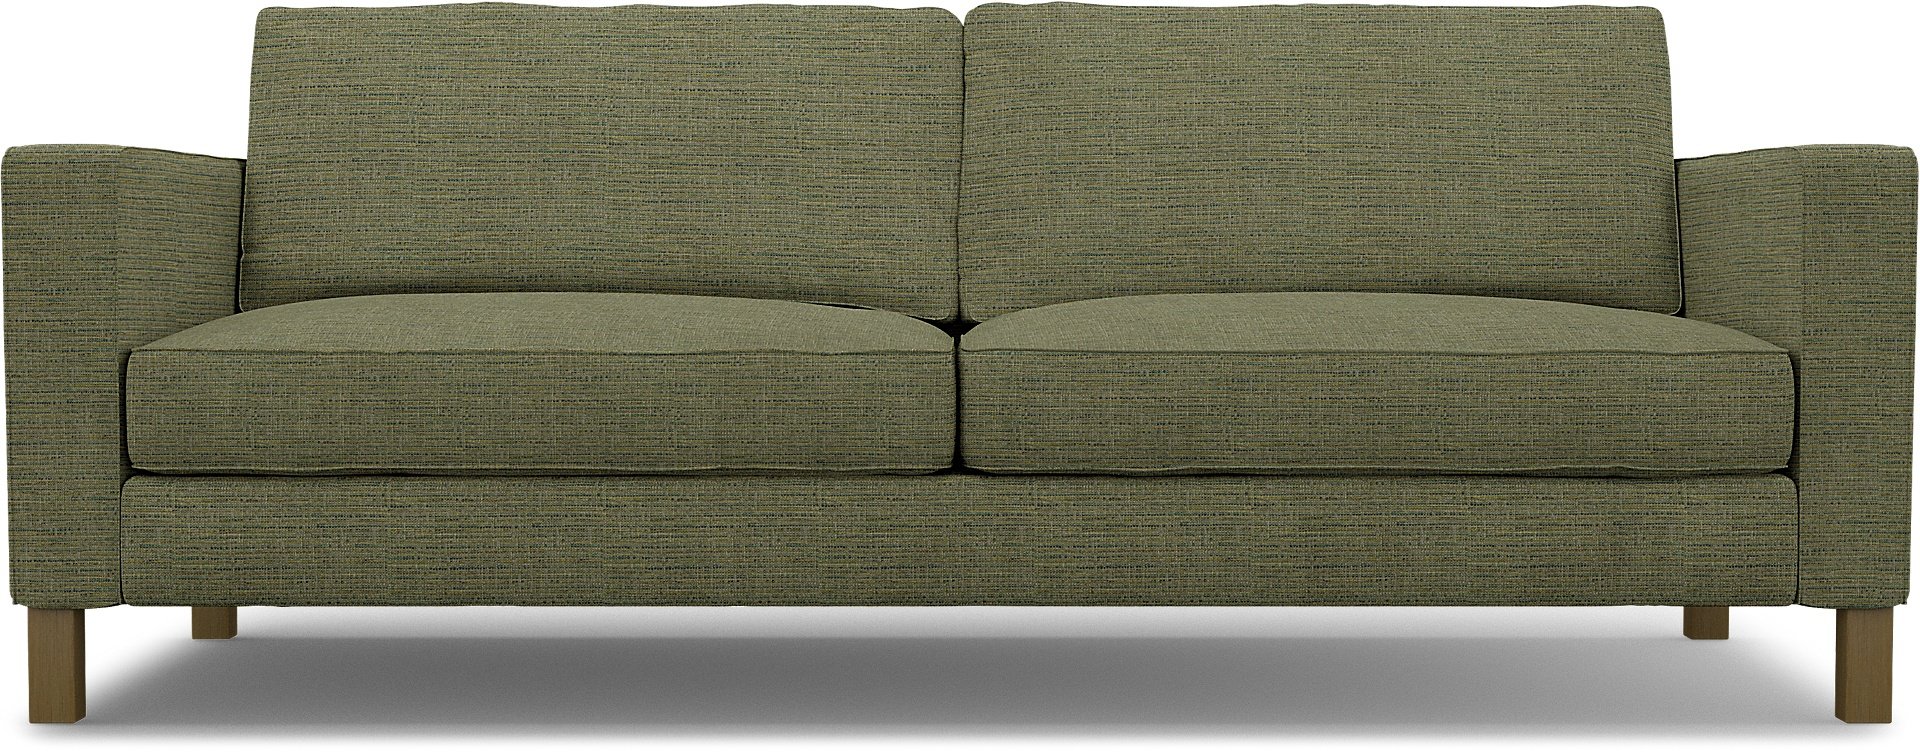 IKEA - Karlstad 3 Seater Sofa Cover, Meadow Green, Boucle & Texture - Bemz